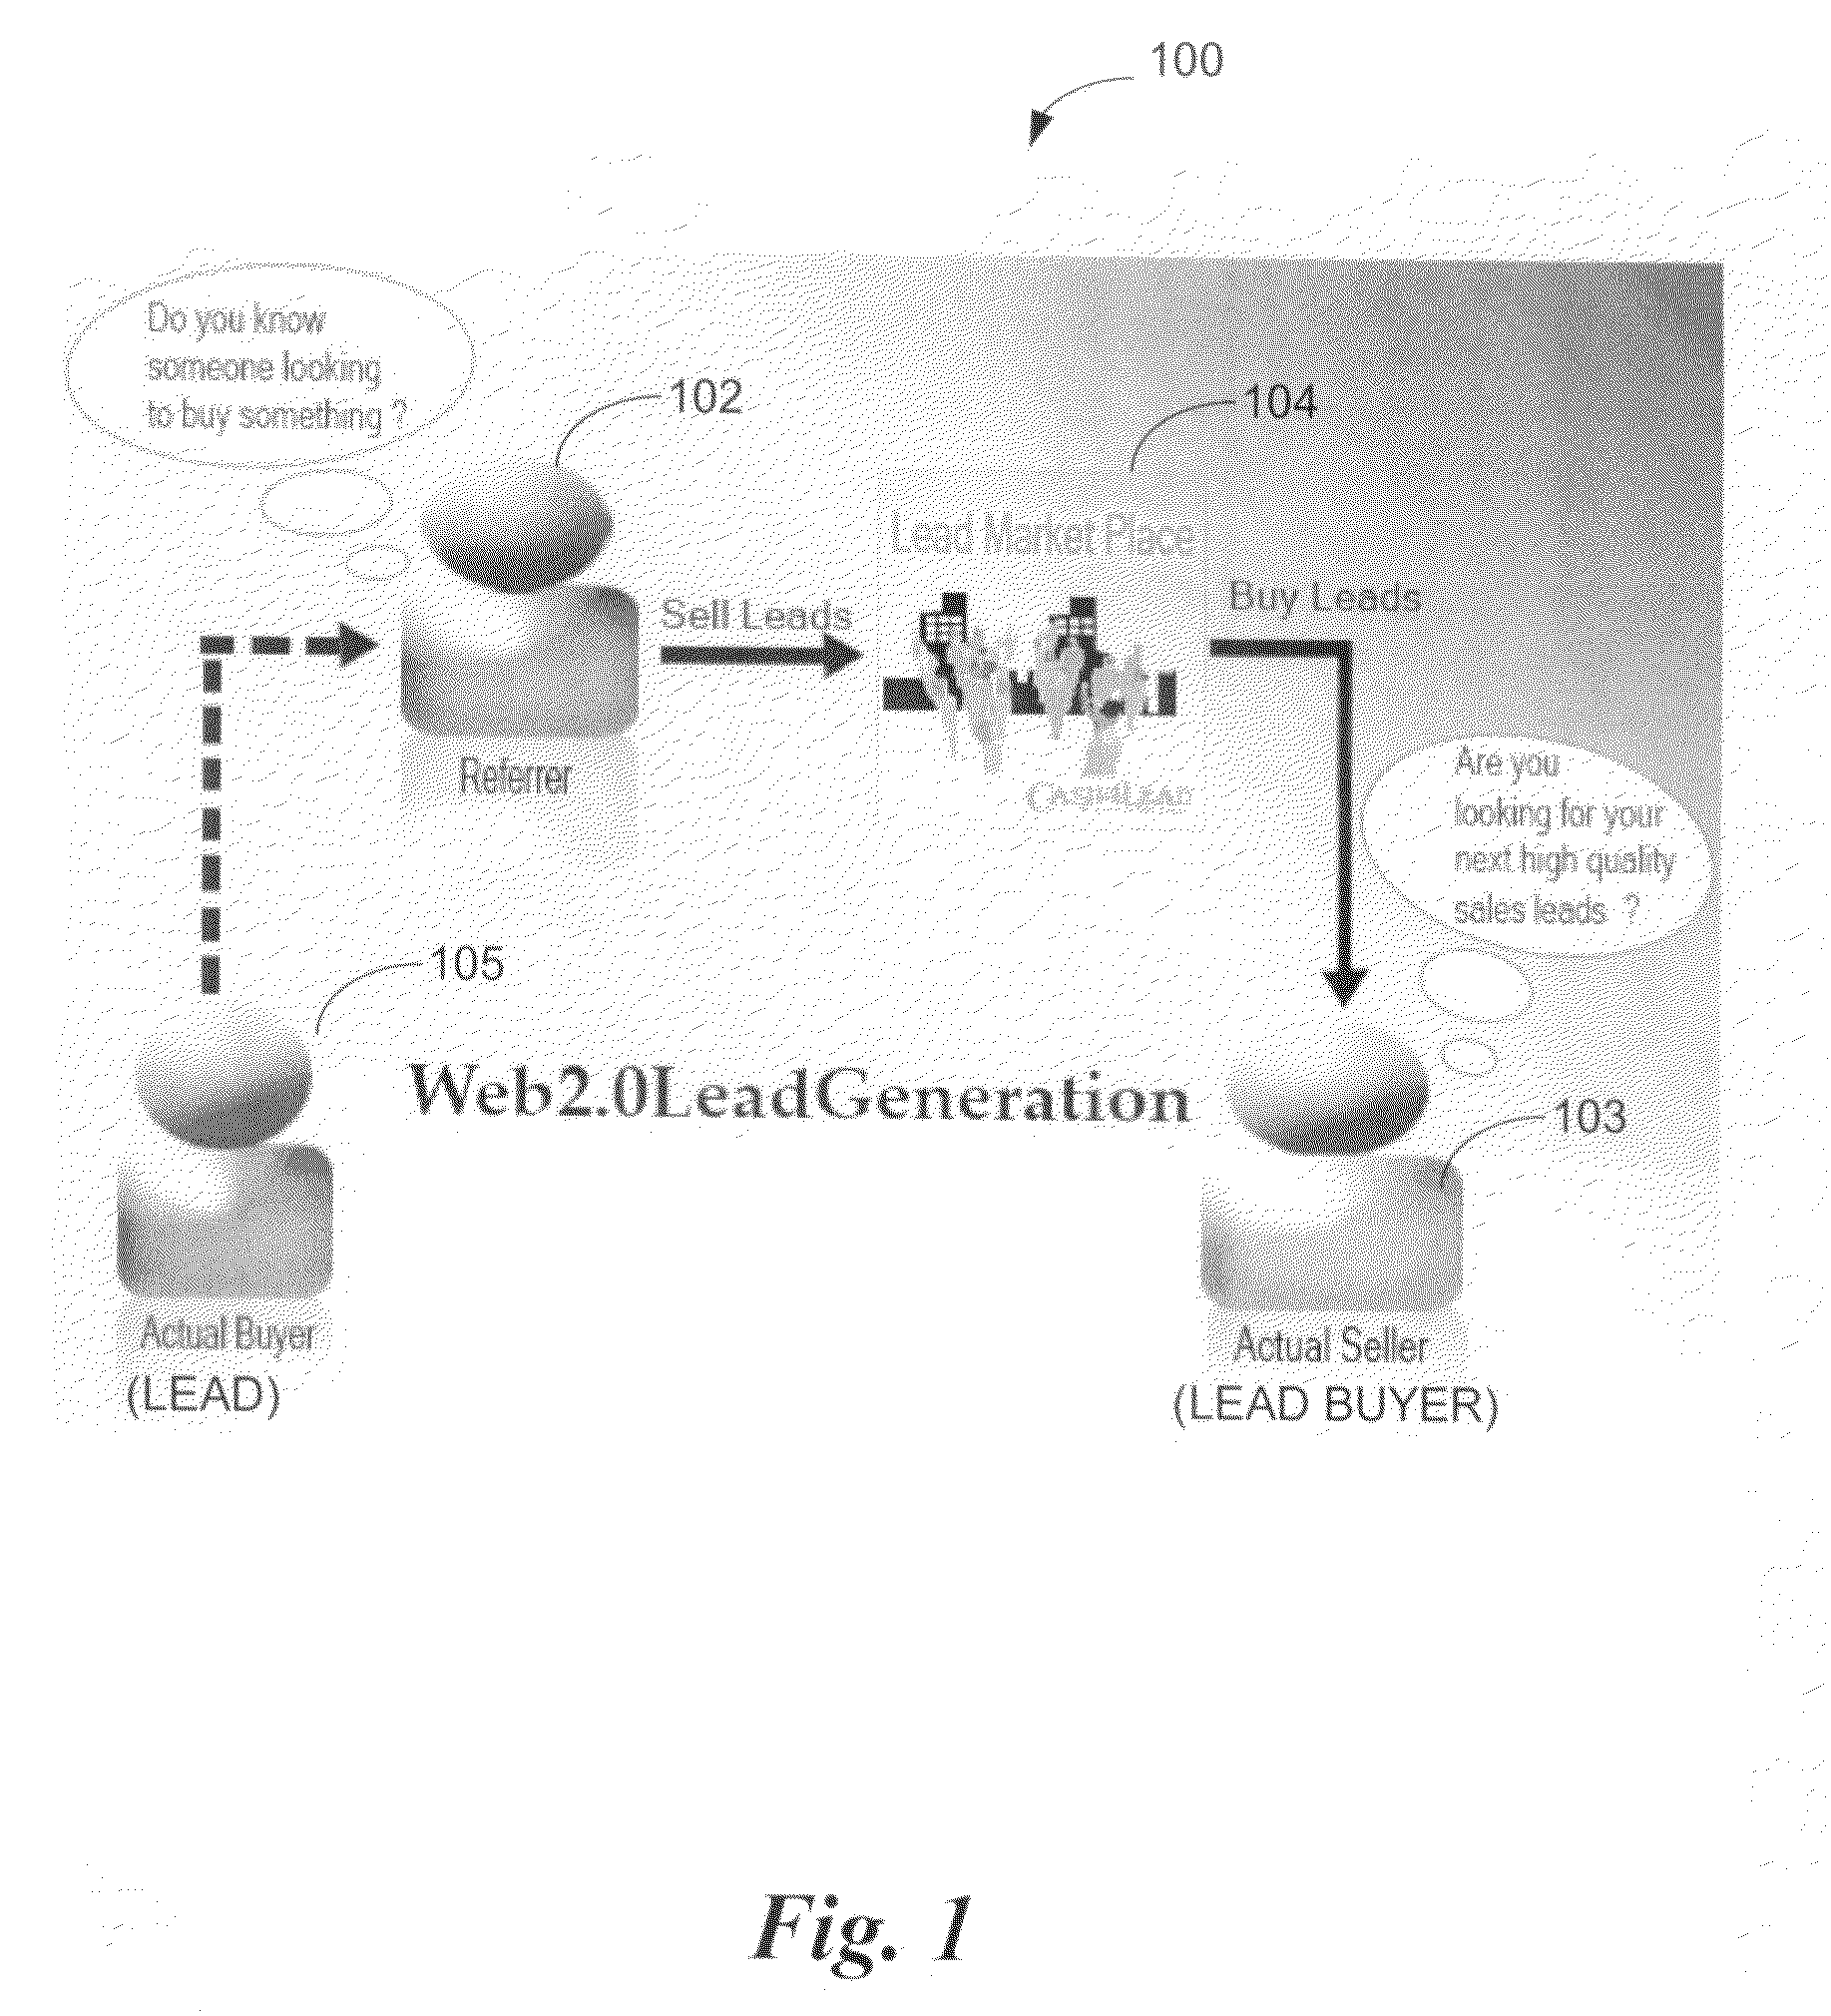 System and method for lead generation and lead demand fulfillment